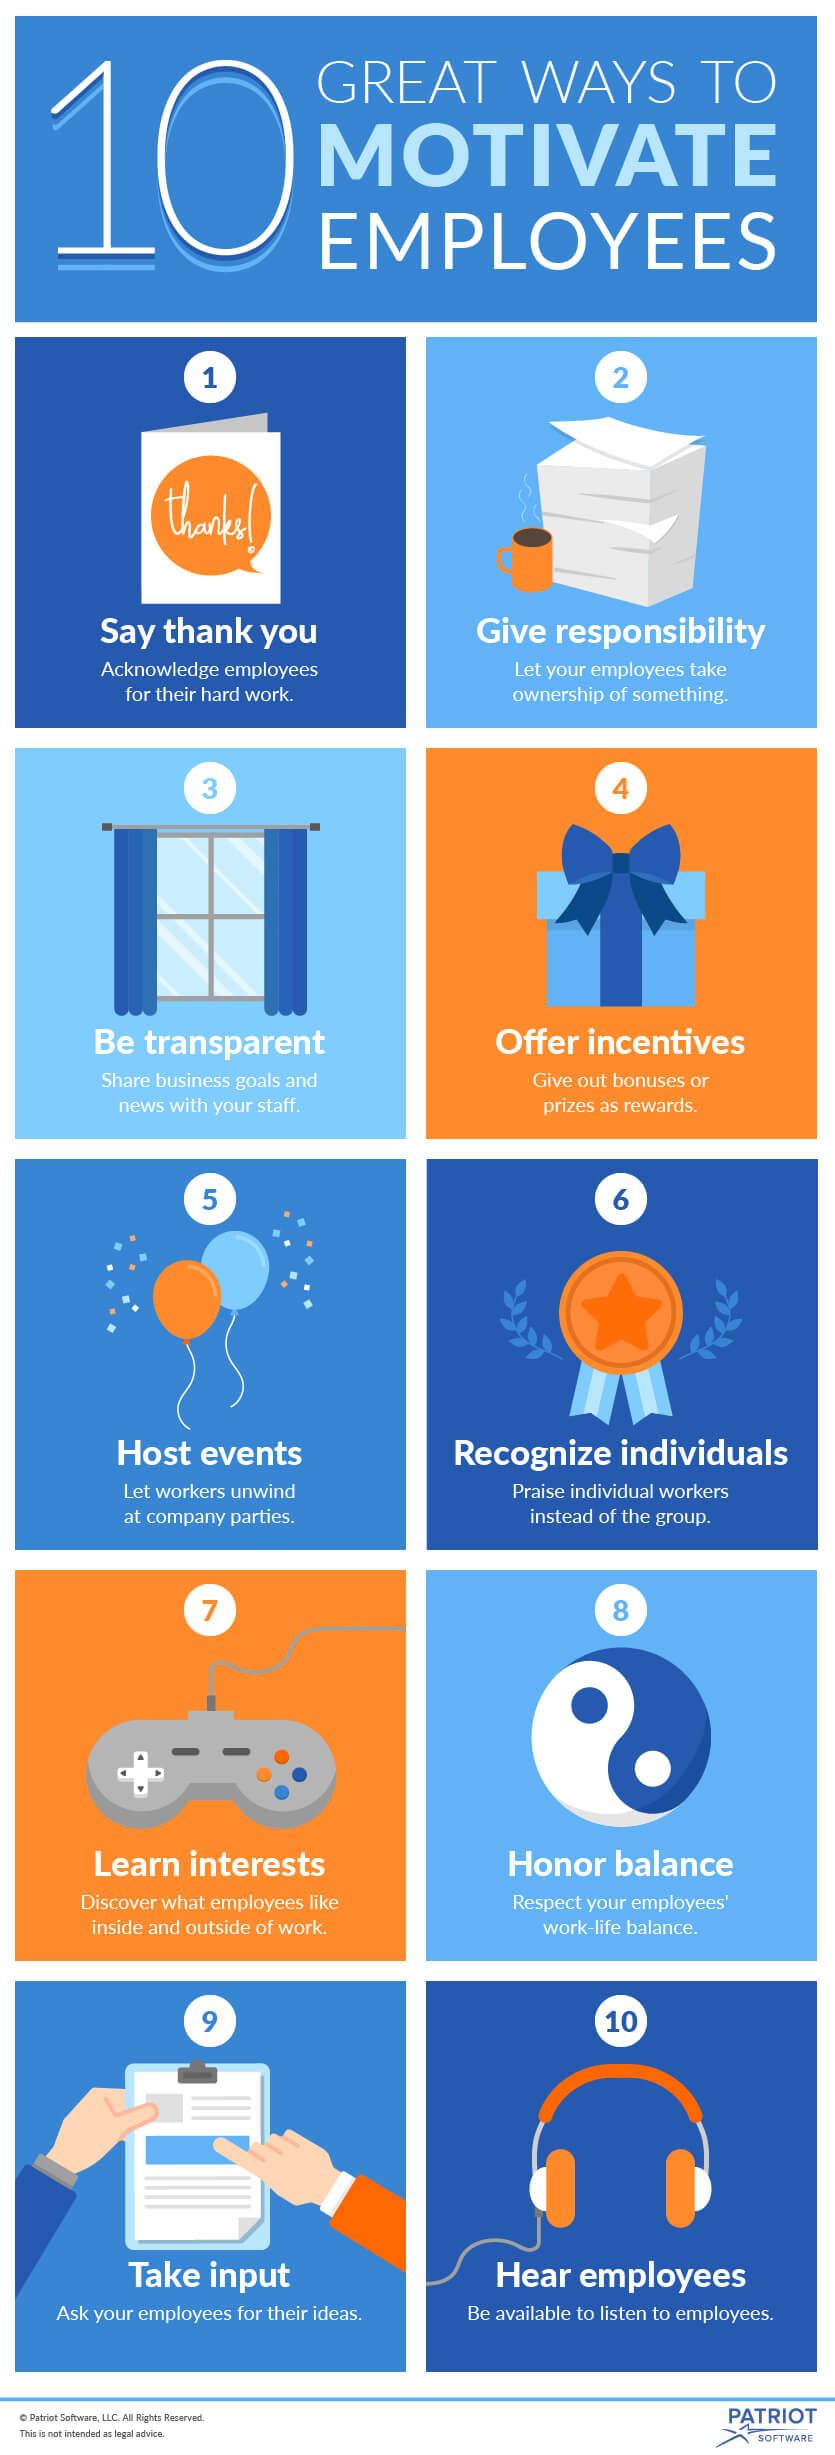 10 Great Ways to Motivate Employees Infographic